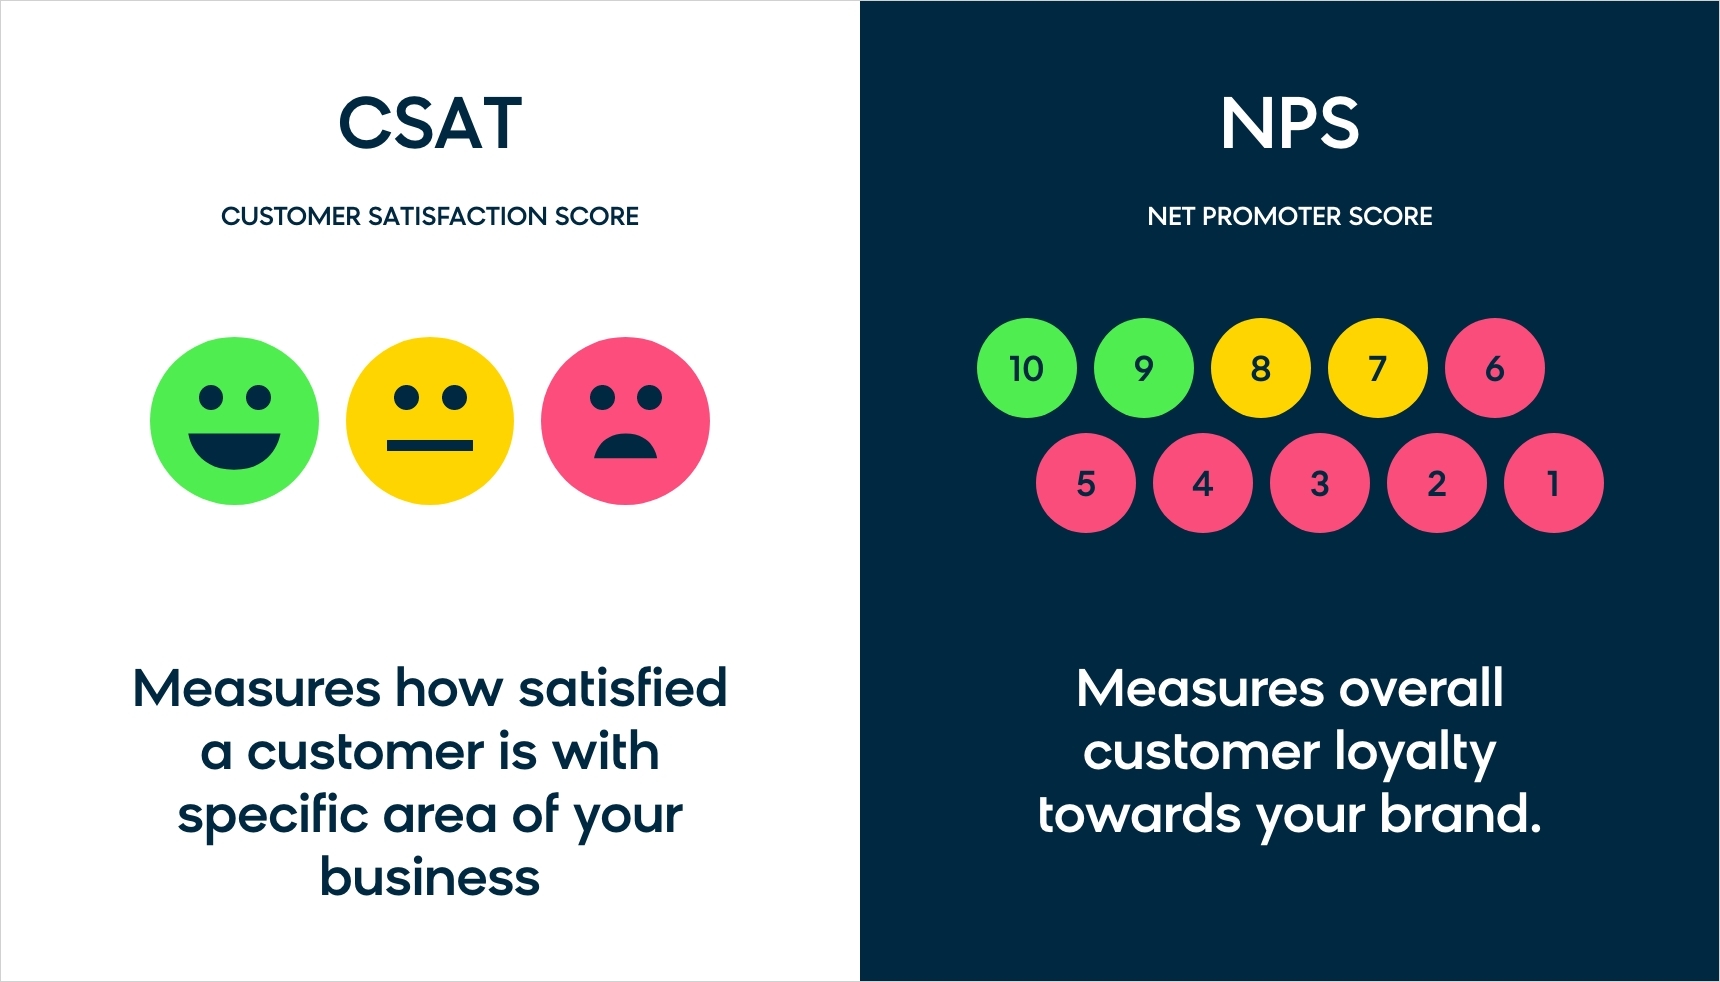 The similarities and differences between a CSAT and NPS for measuring customer satisfaction